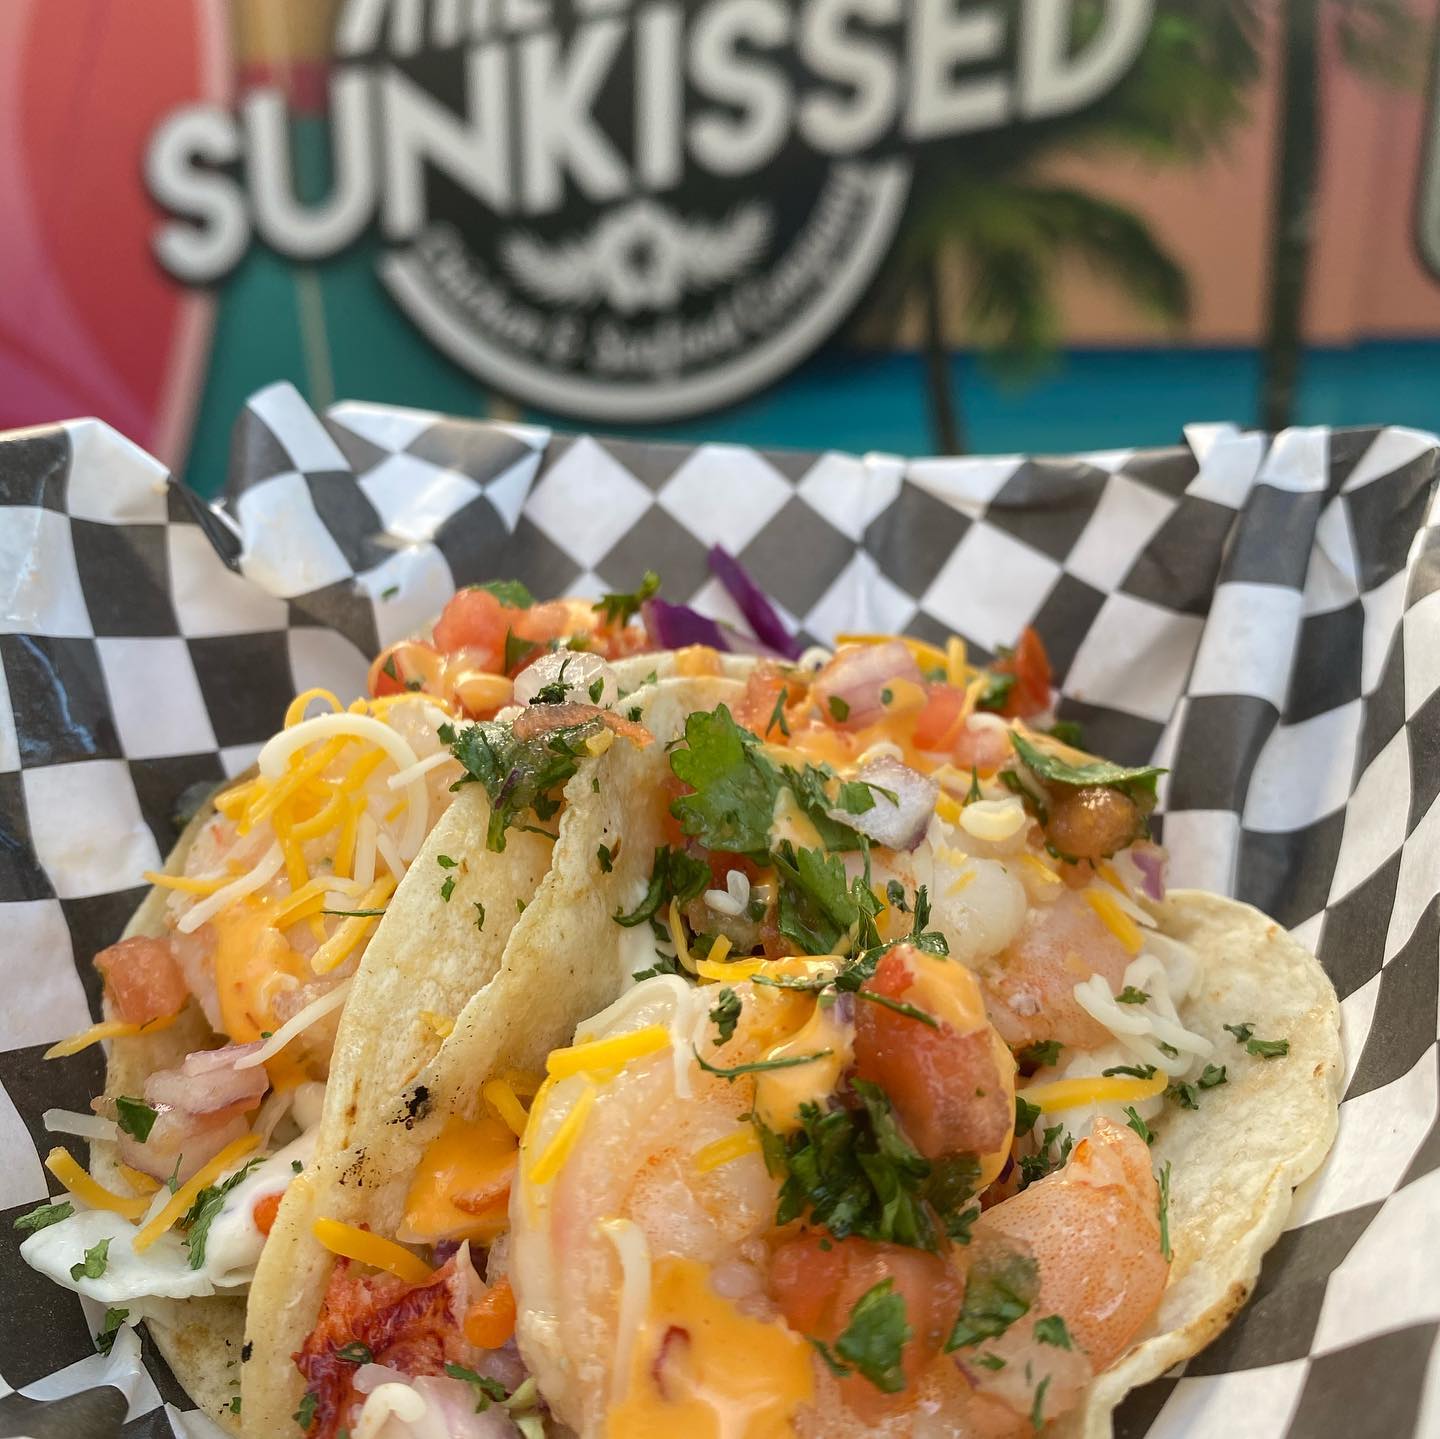 The Sunkissed Food Truck Tacos